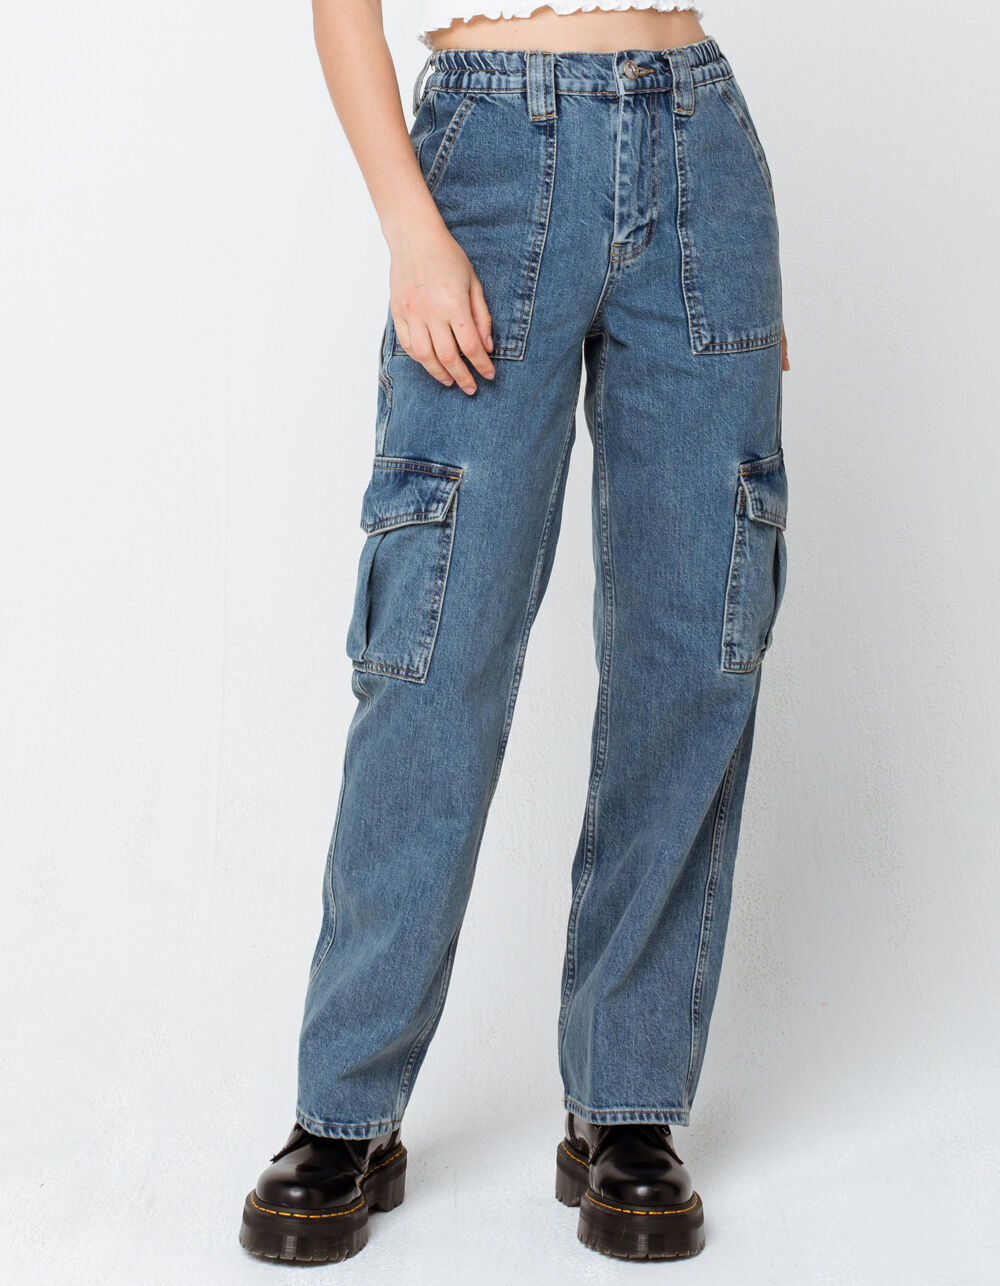 Women's BDG Urban Outfitters High-Waisted Jeans